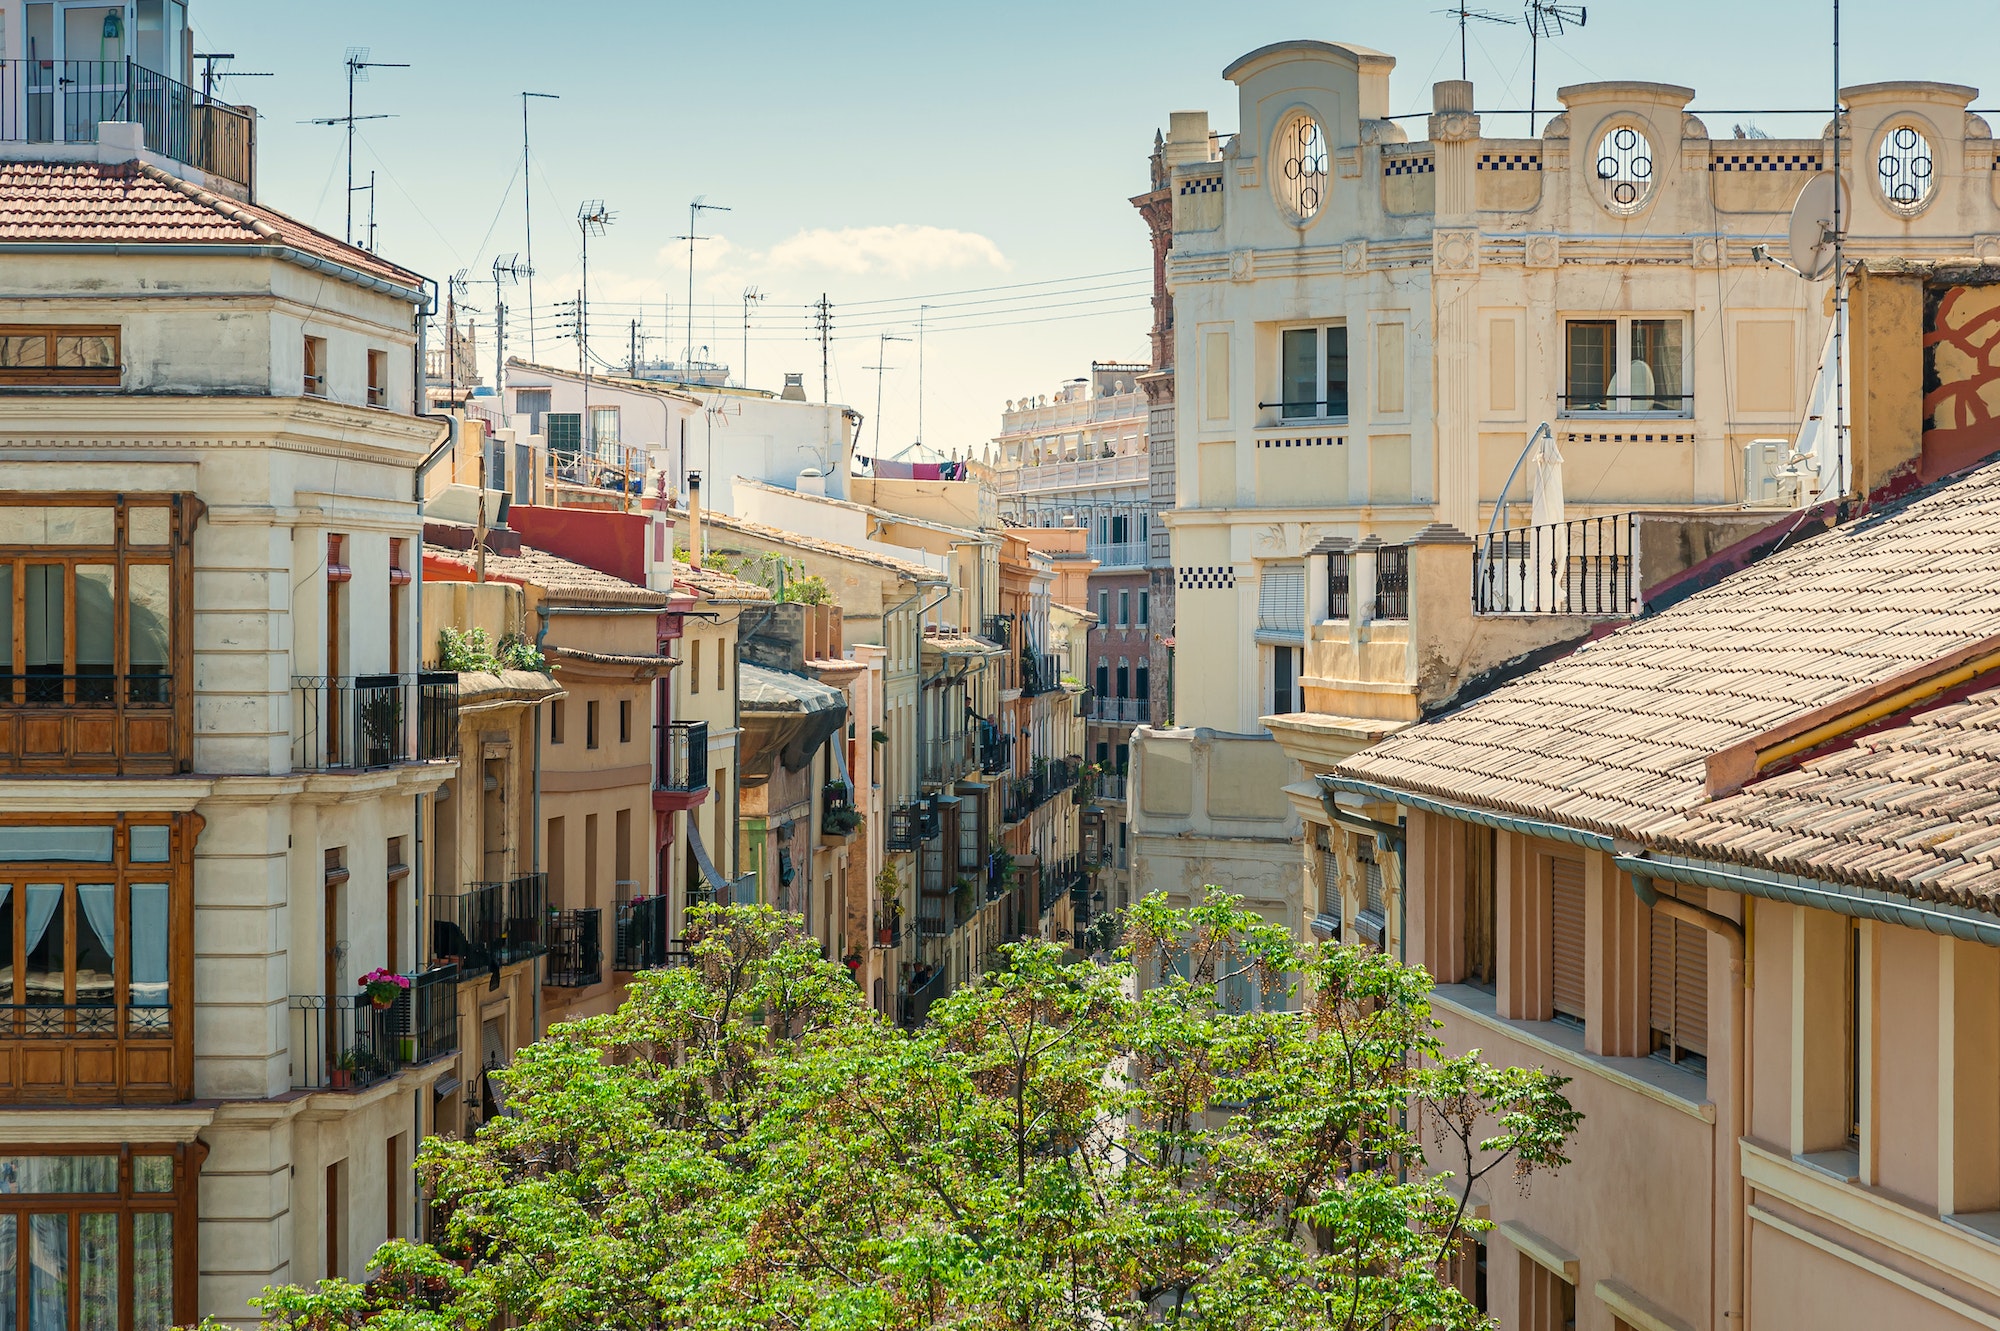 View at Valencia downtown with rooftops of residential dwellings. Valencia downtown. Spain. Europe.